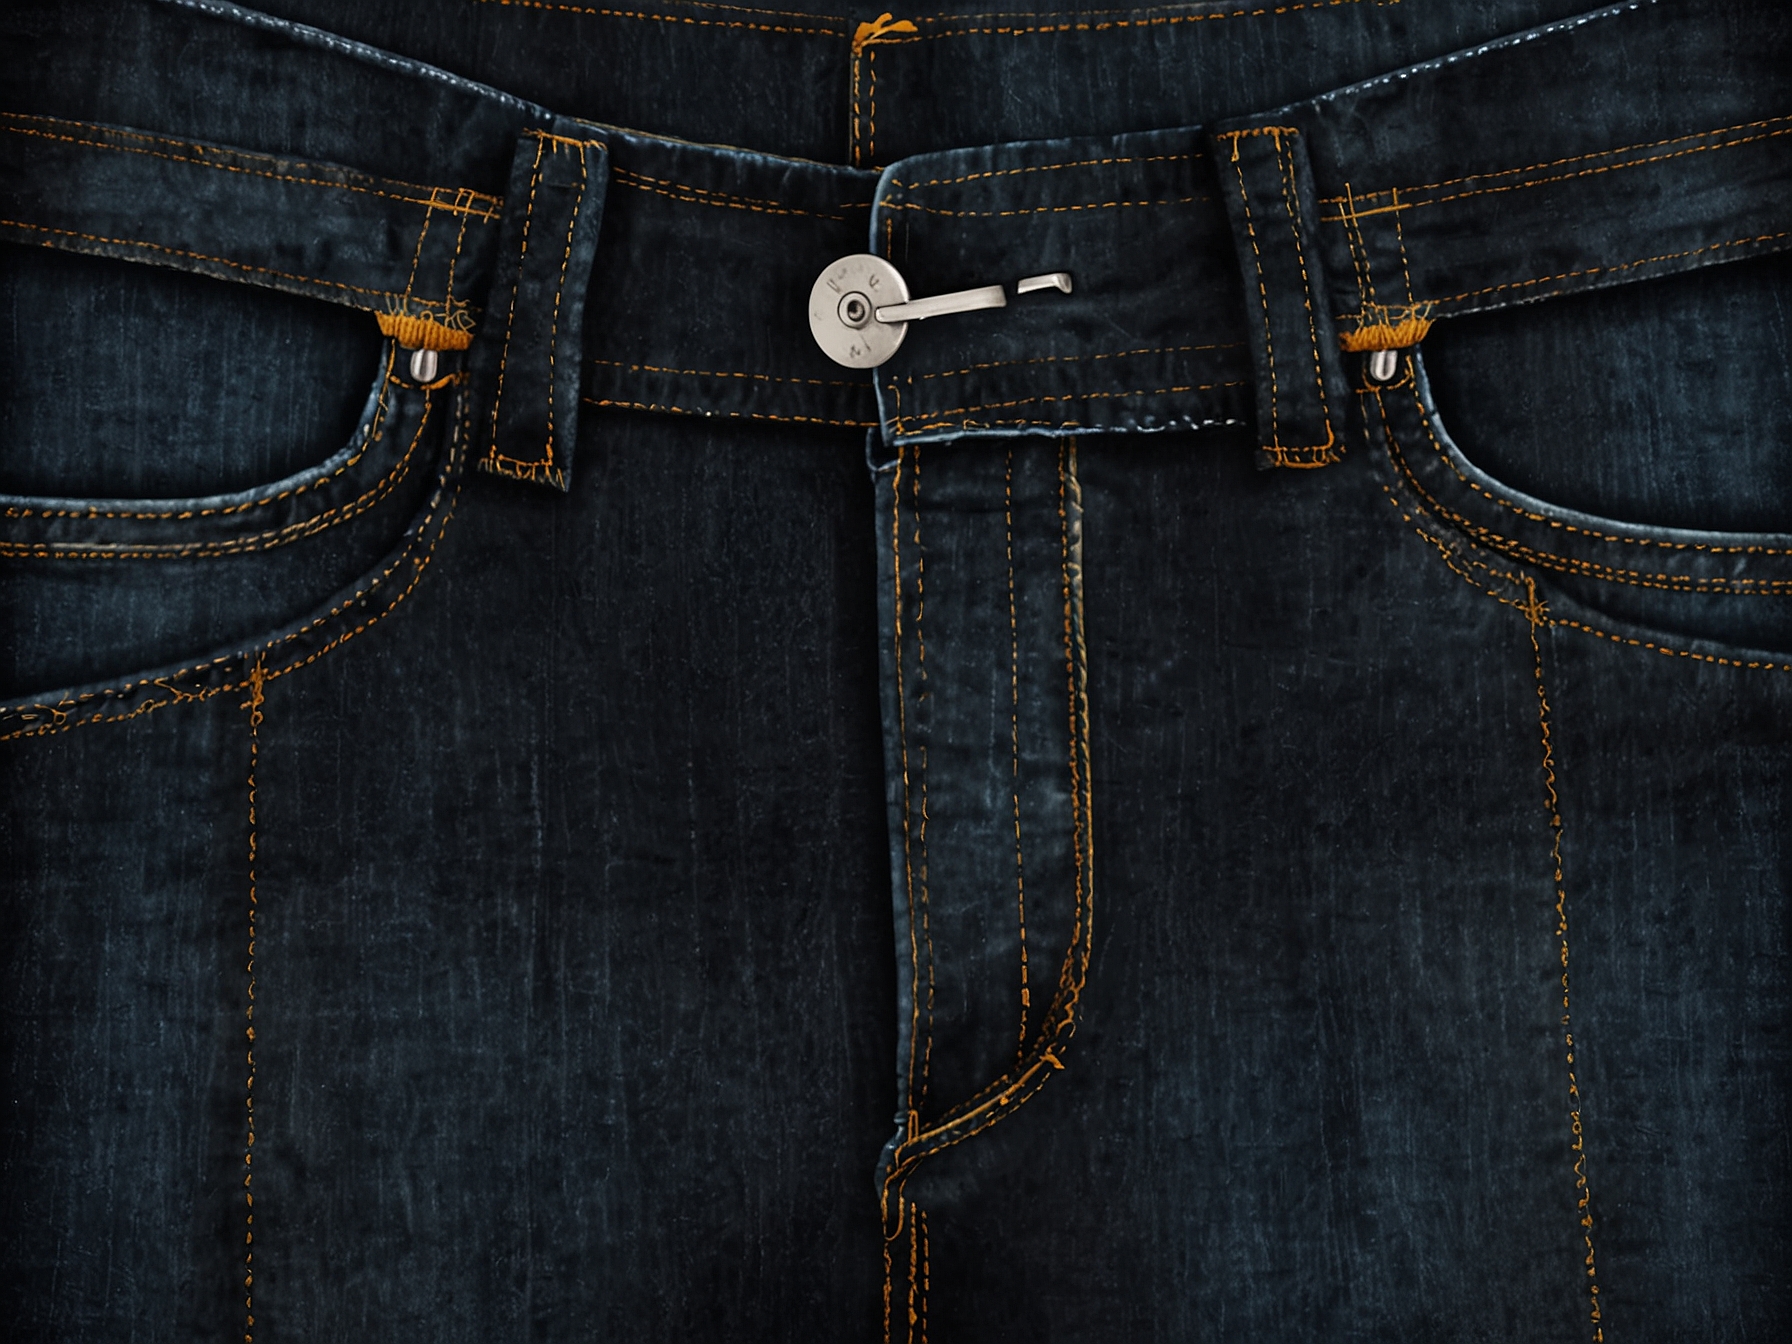 Close-up of the M&S jeans' waistband and stitching, emphasizing the high-quality material, meticulous design, and comfort that customers rave about. The jeans are paired with different tops and accessories.